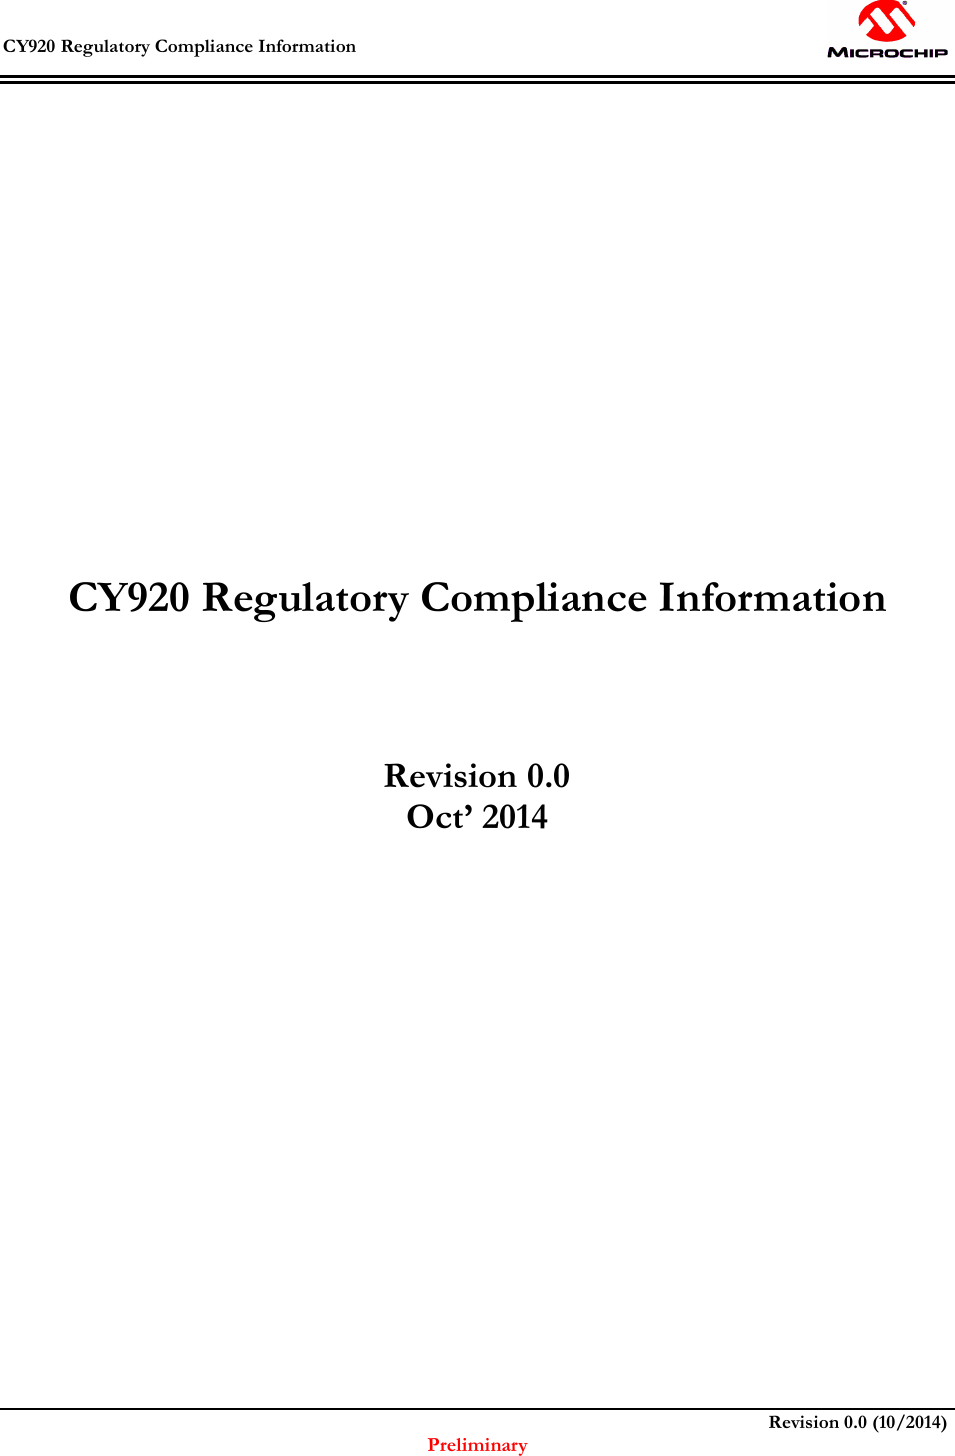  CY920 Regulatory Compliance Information                                                                         Revision 0.0 (10/2014) Preliminary      CY920 Regulatory Compliance Information    Revision 0.0 Oct’ 2014  